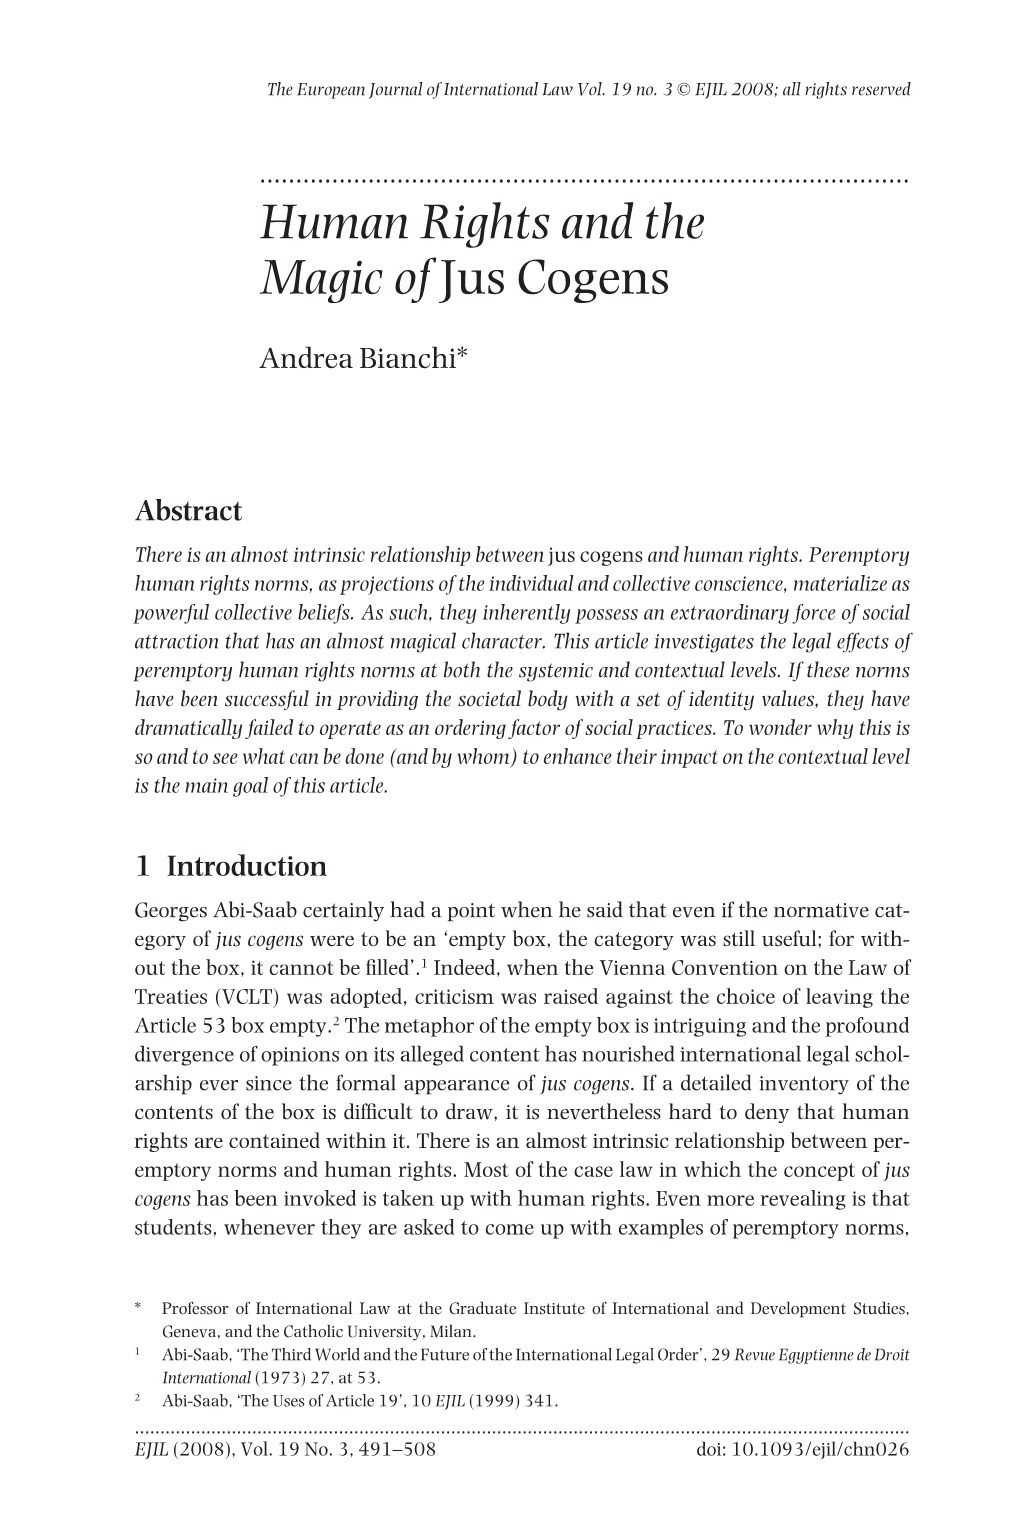 Human Rights and the Magic of Jus Cogens